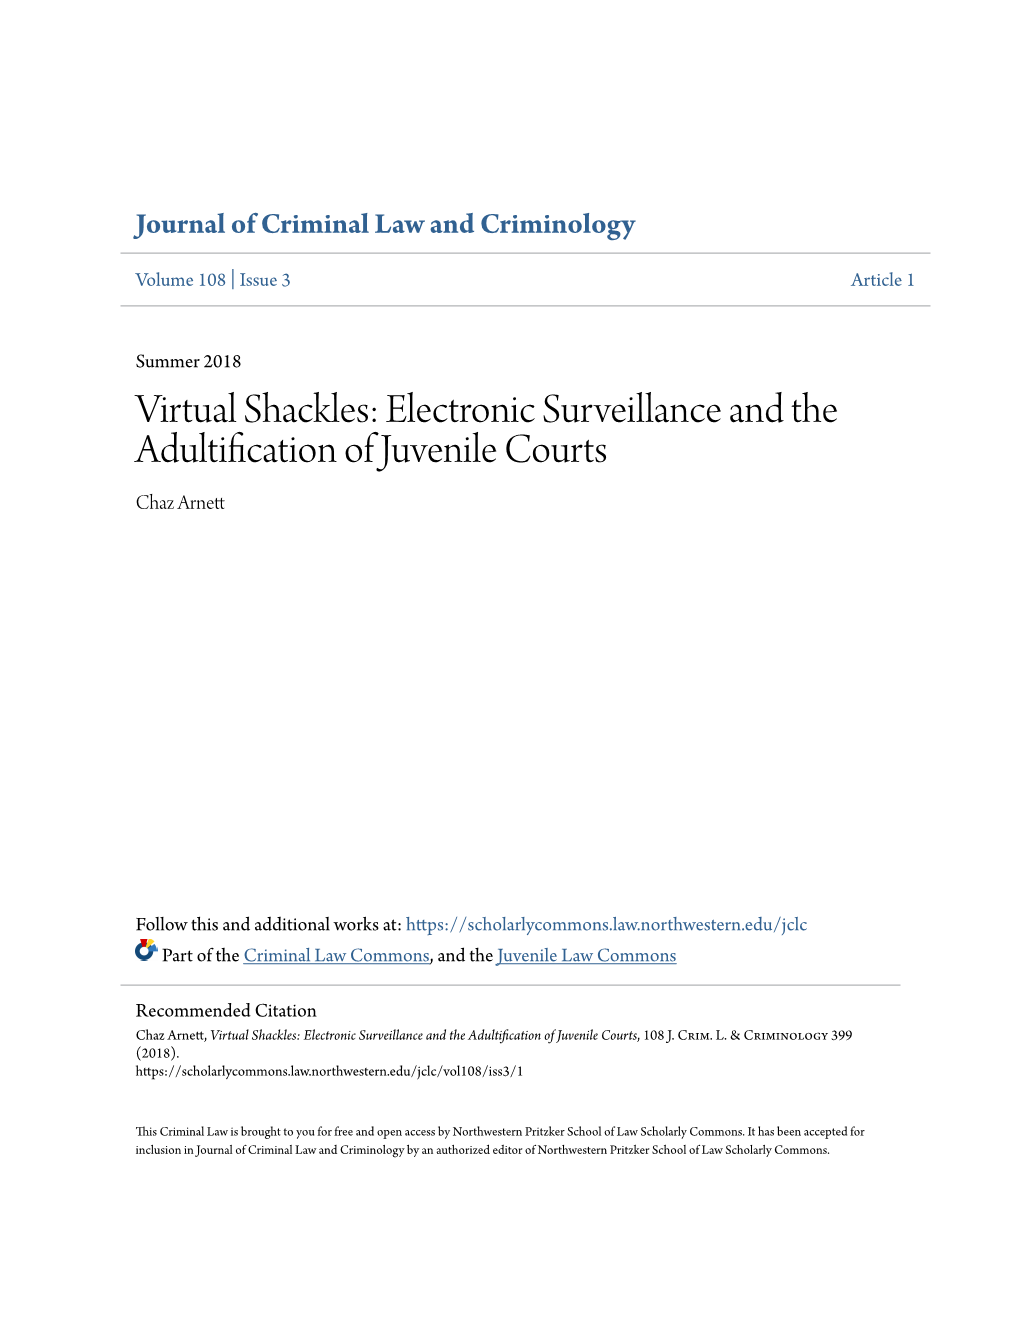 Electronic Surveillance and the Adultification of Juvenile Courts Chaz Arnett